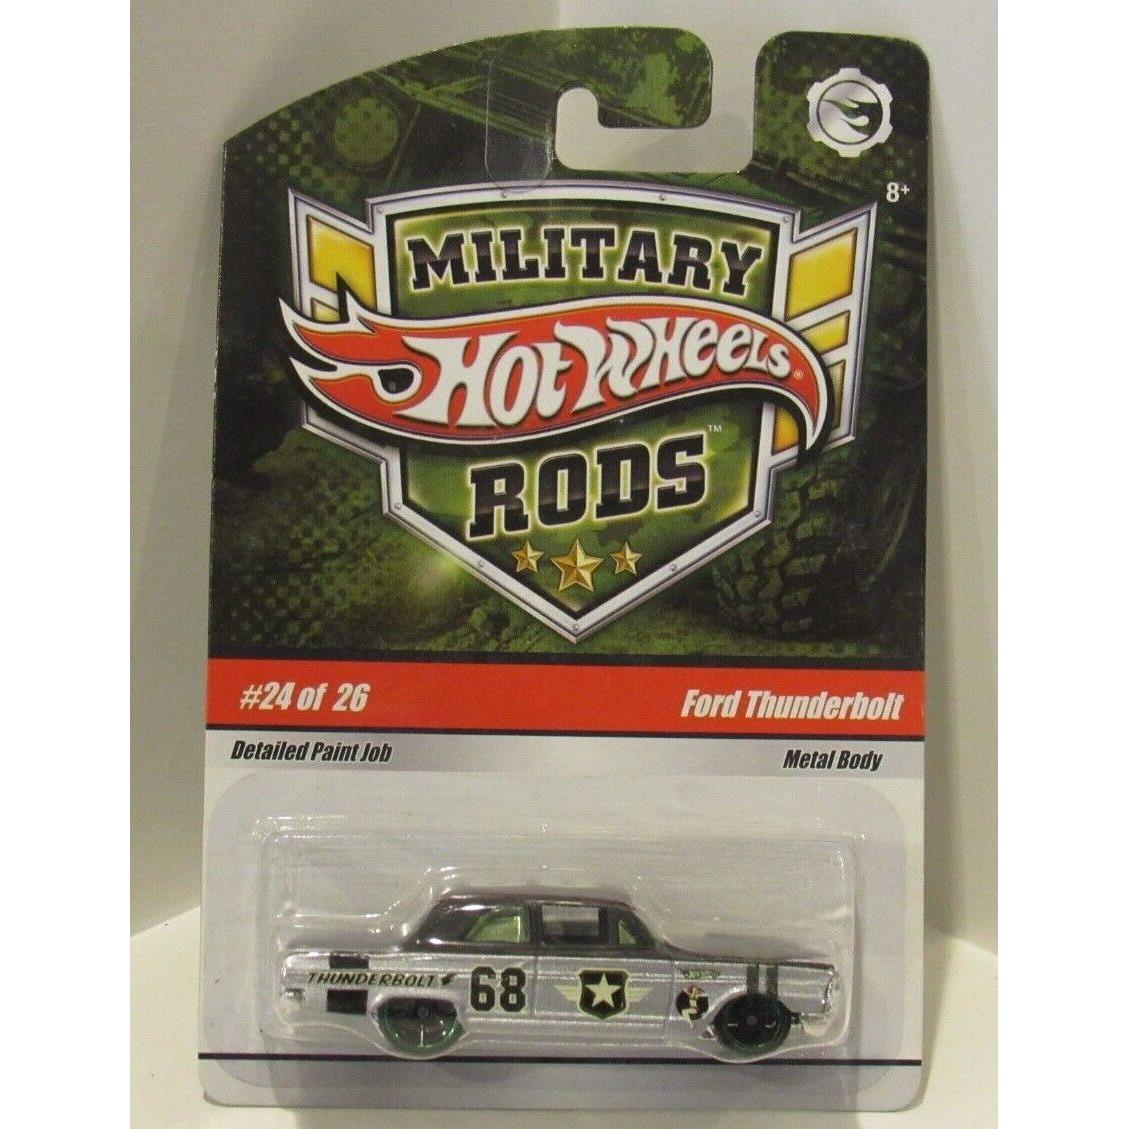 Hot Wheels 2009 Military Rods 24/26 Ford Thunderbolt Fairlane 1964 Hard To Find